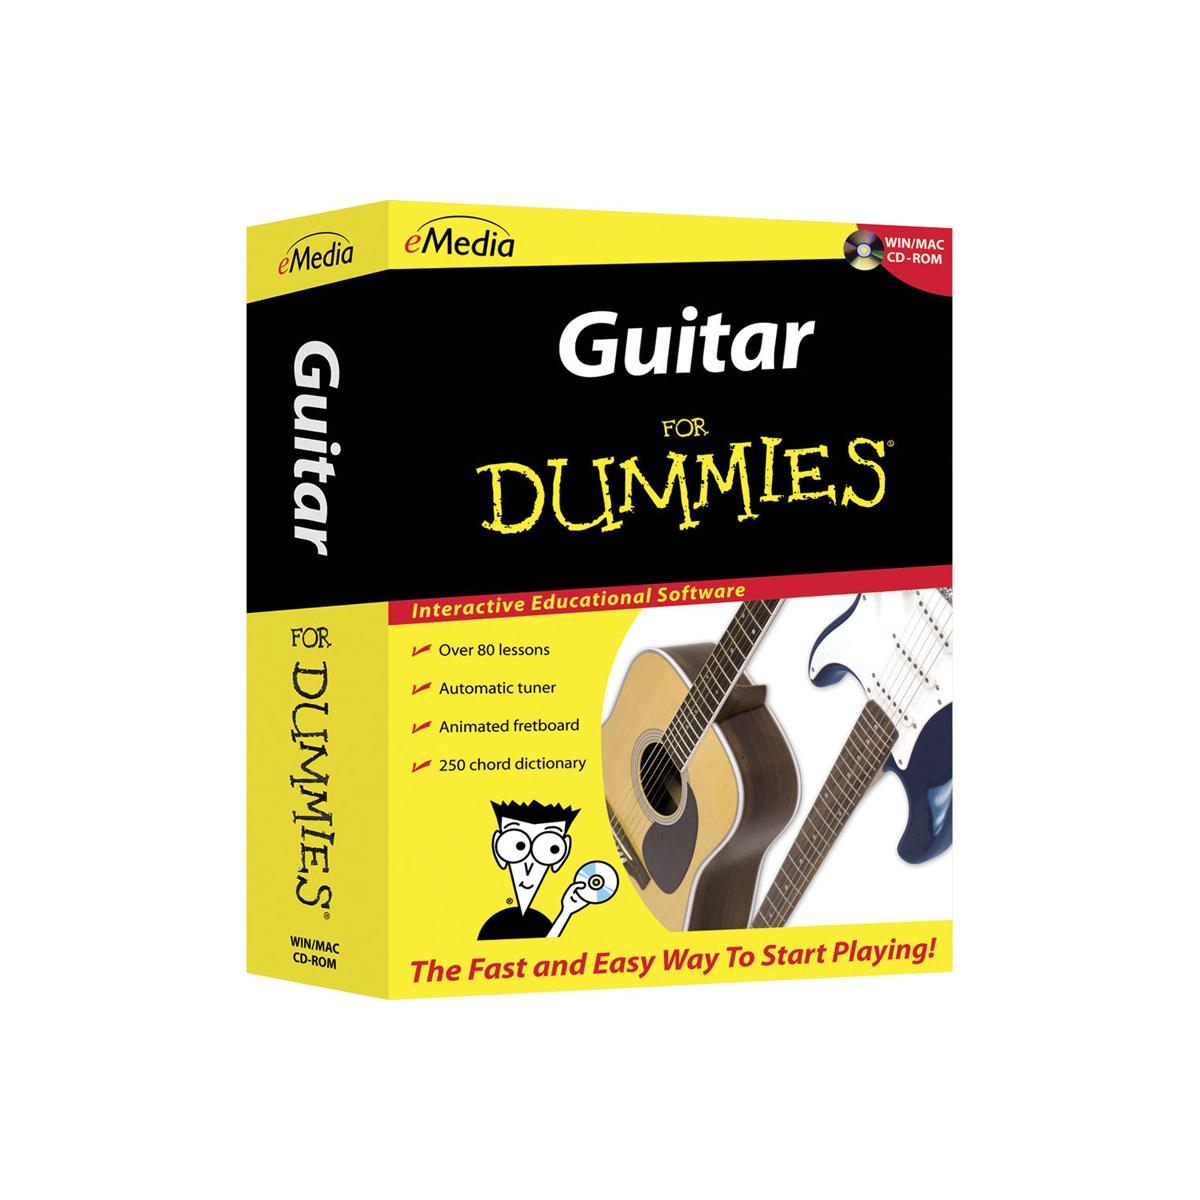 eMedia Guitar For Dummies v2 Software for Windows, Electronic Download -  FD12091DLW